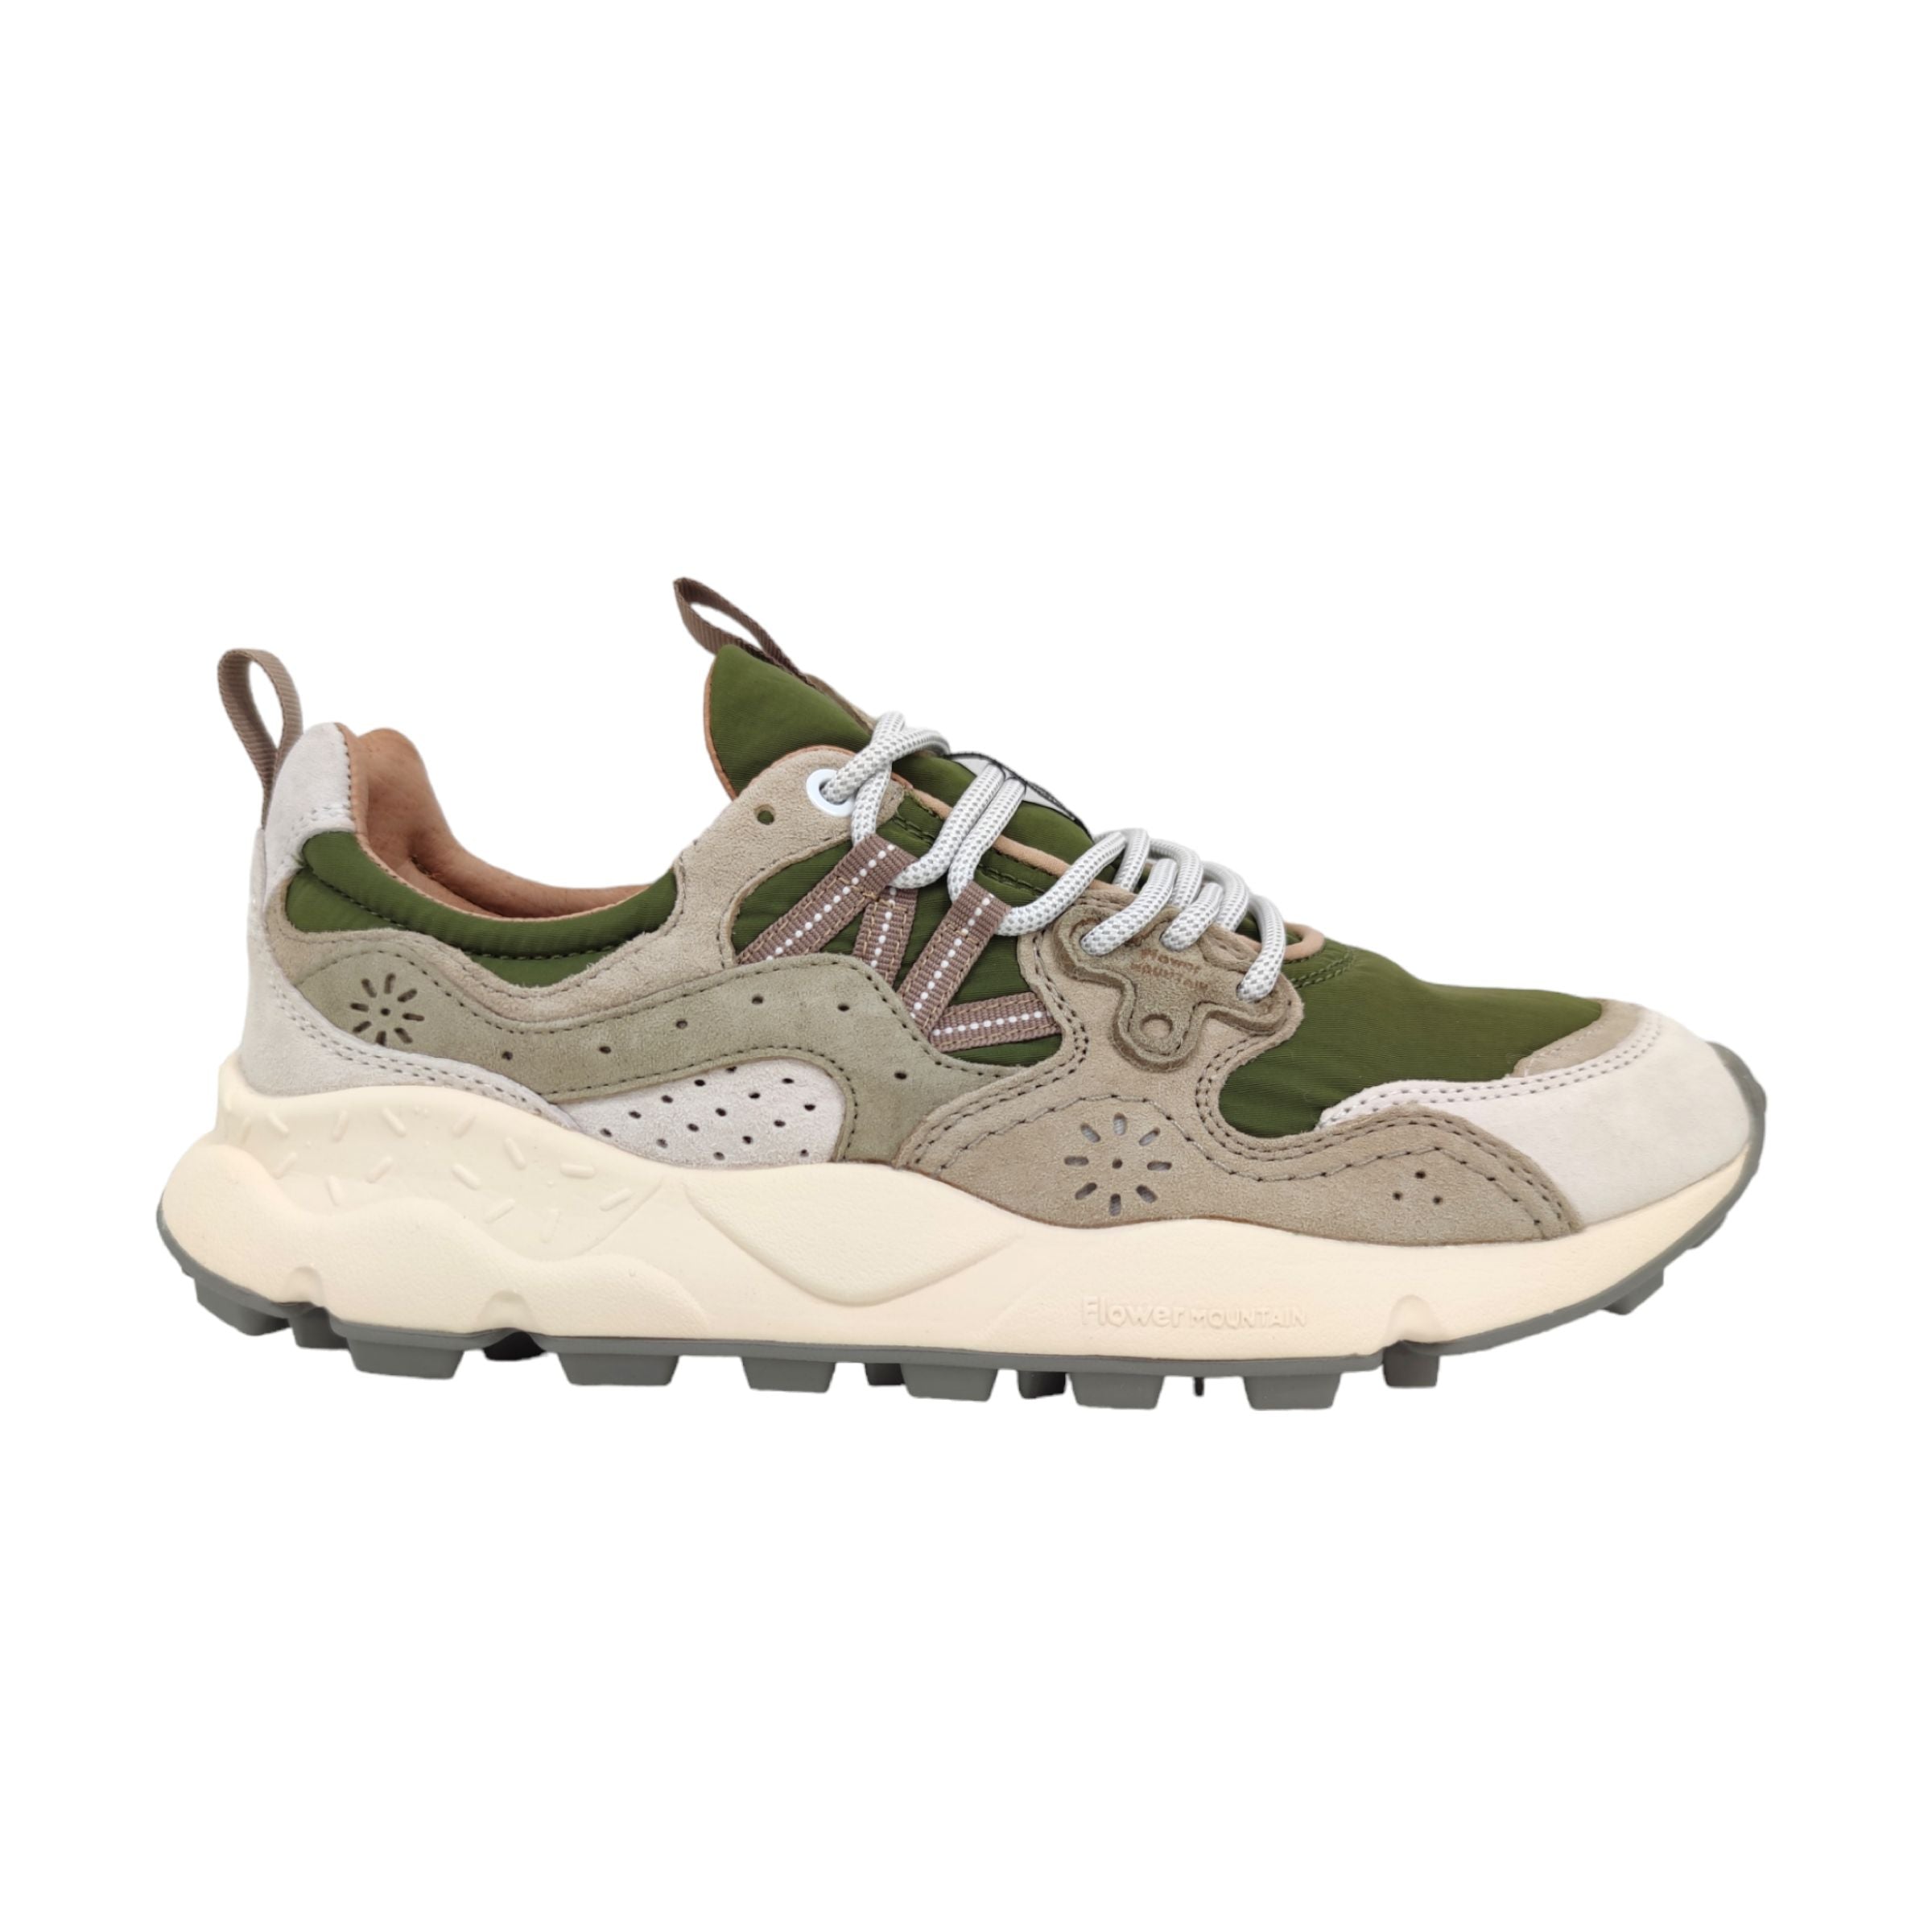 Men's Yamano 3 Shoes Off White/Military/Green 